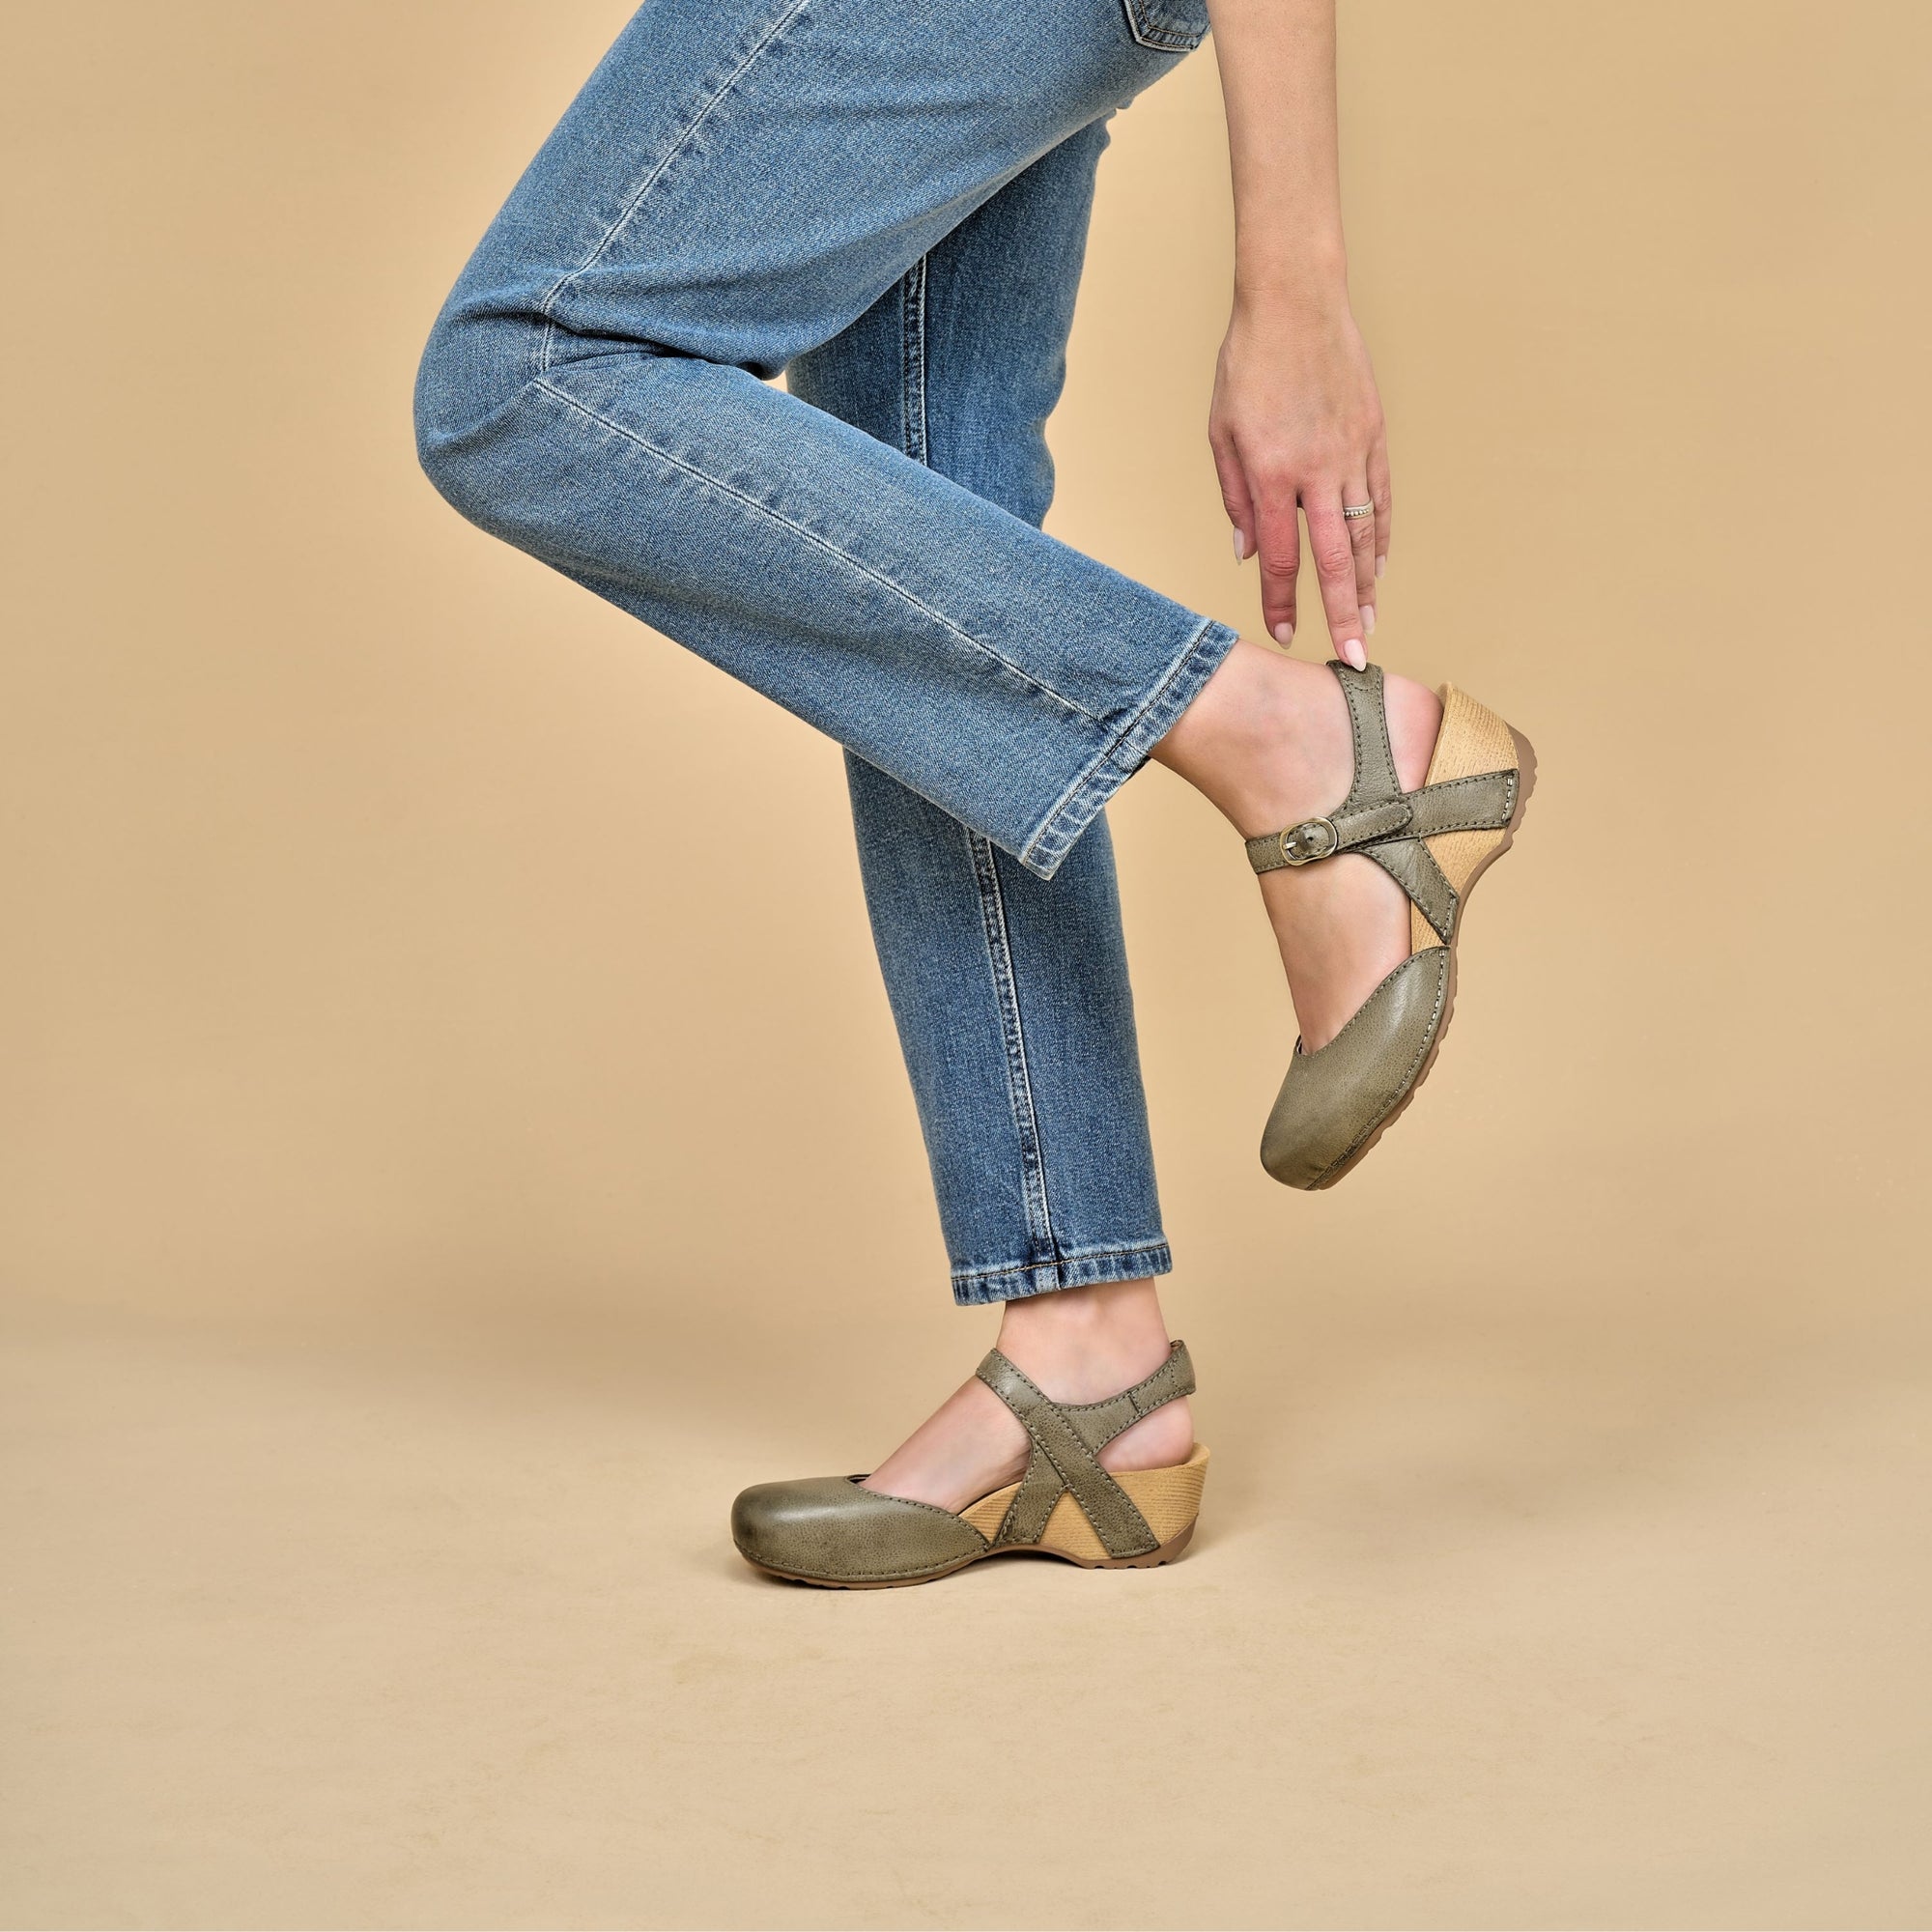 A closeup of green transitional flatform sandals with an adjustable strap shown on foot.